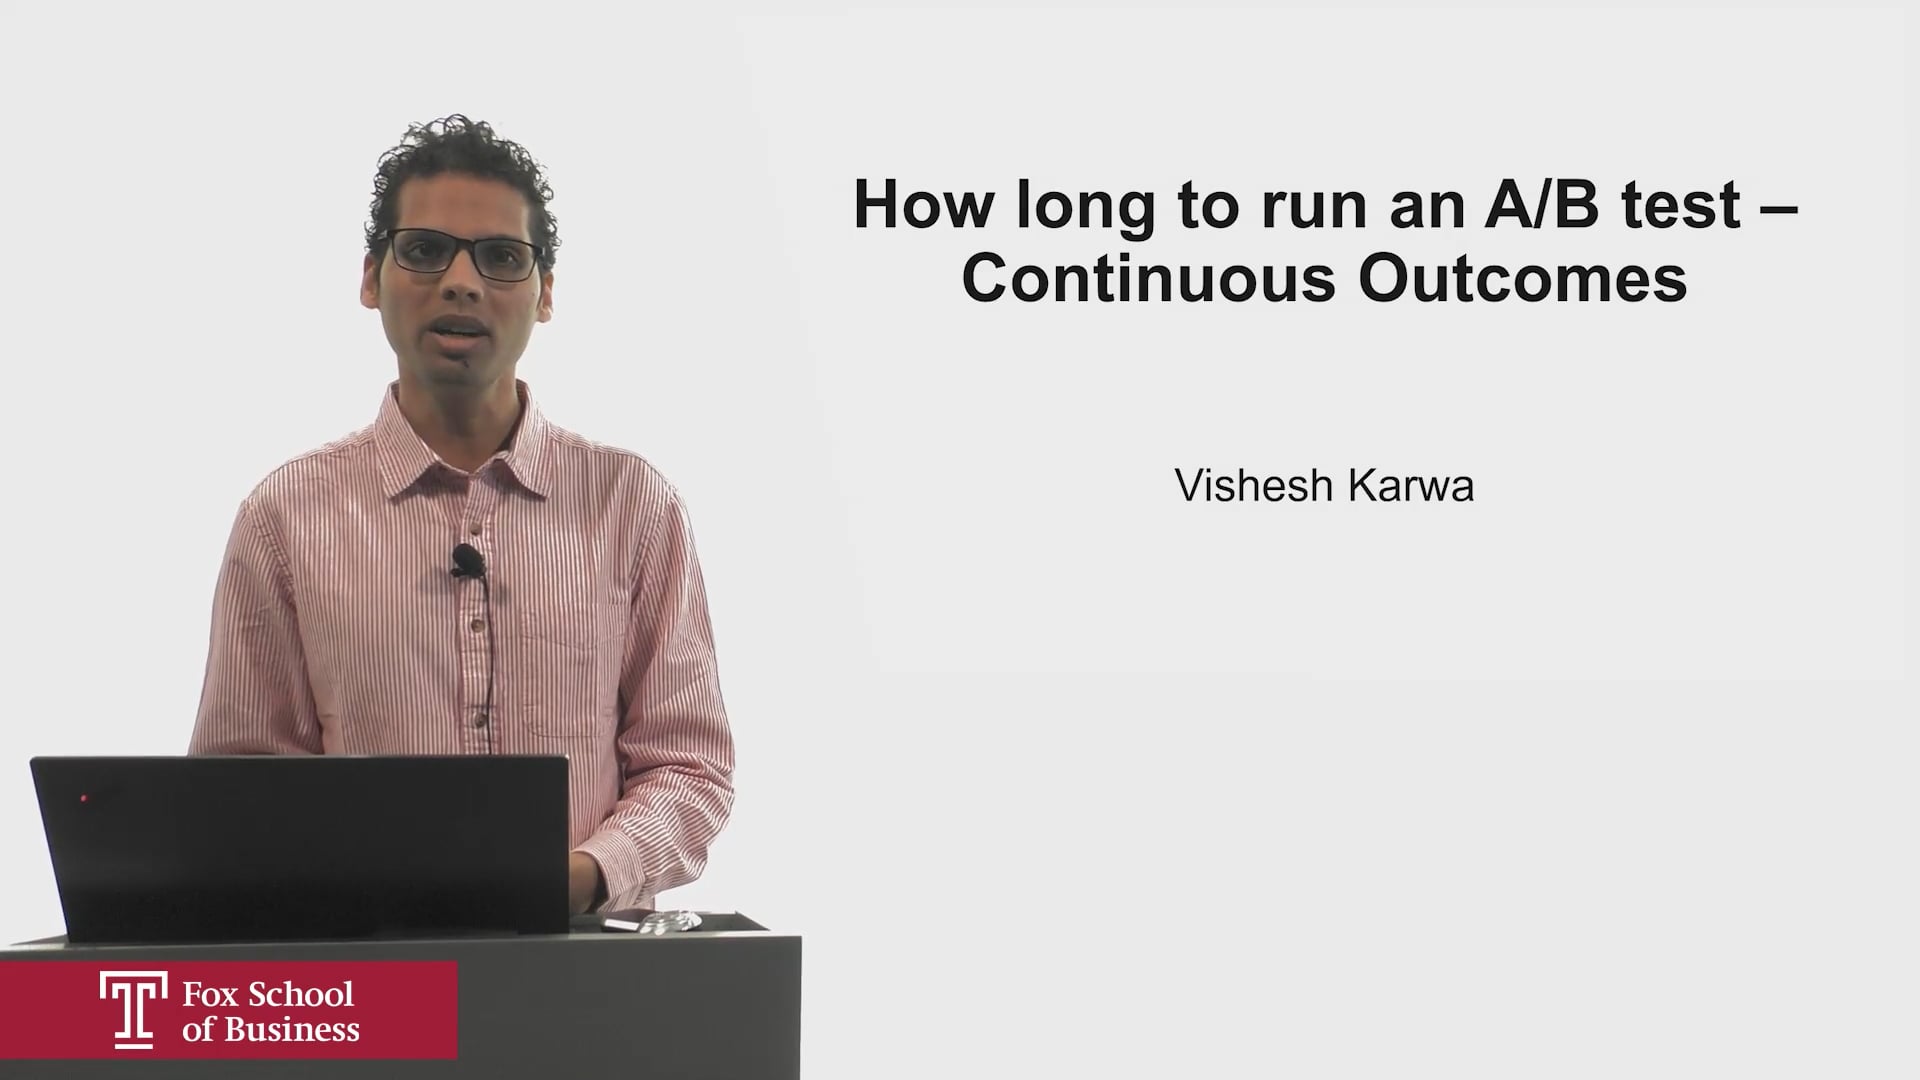 How Long to Run an AB Test Continuous Outcomes